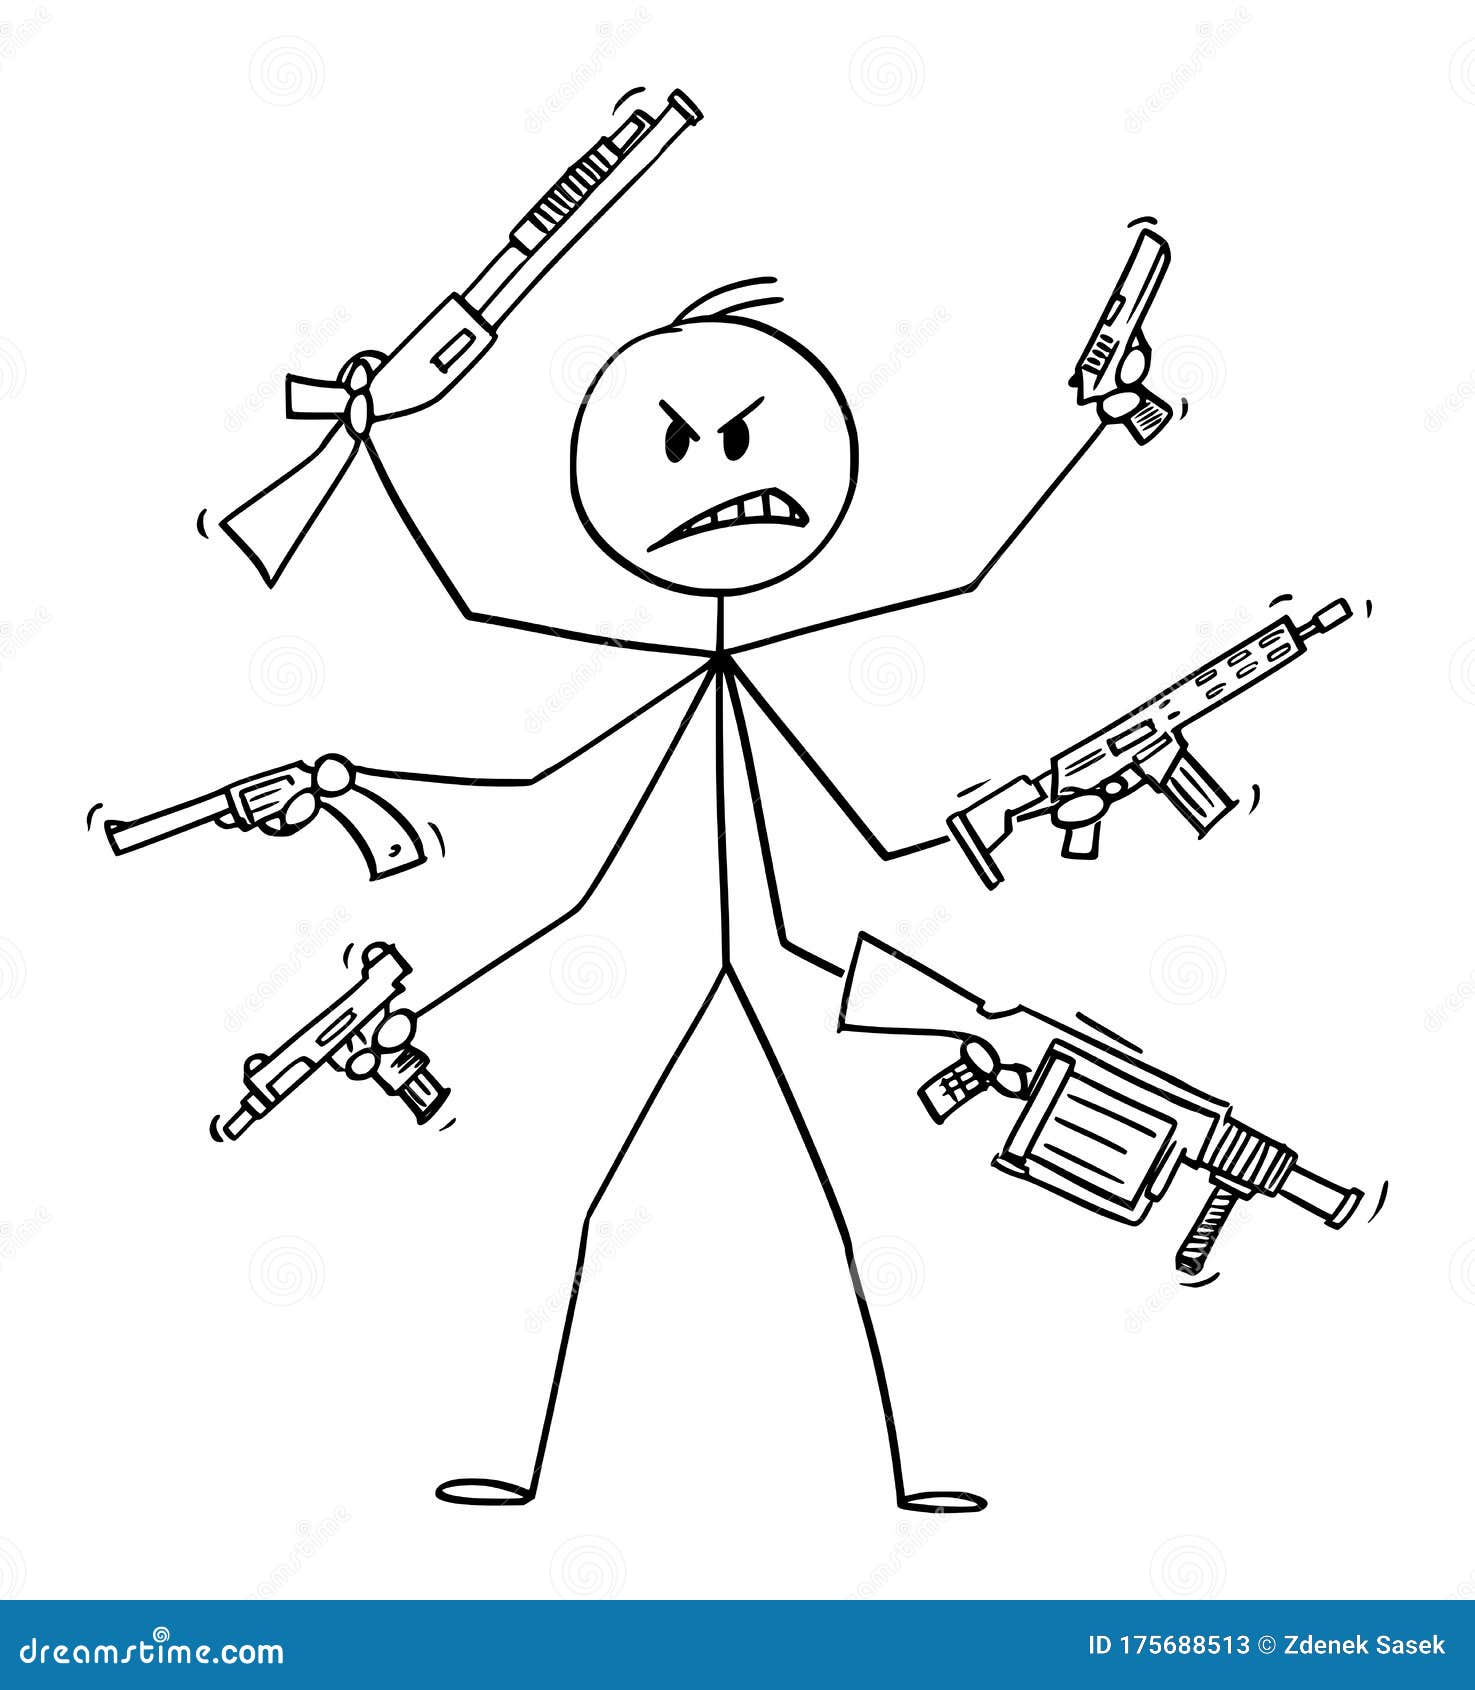 Cartoon stick man drawing conceptual illustration of soldier